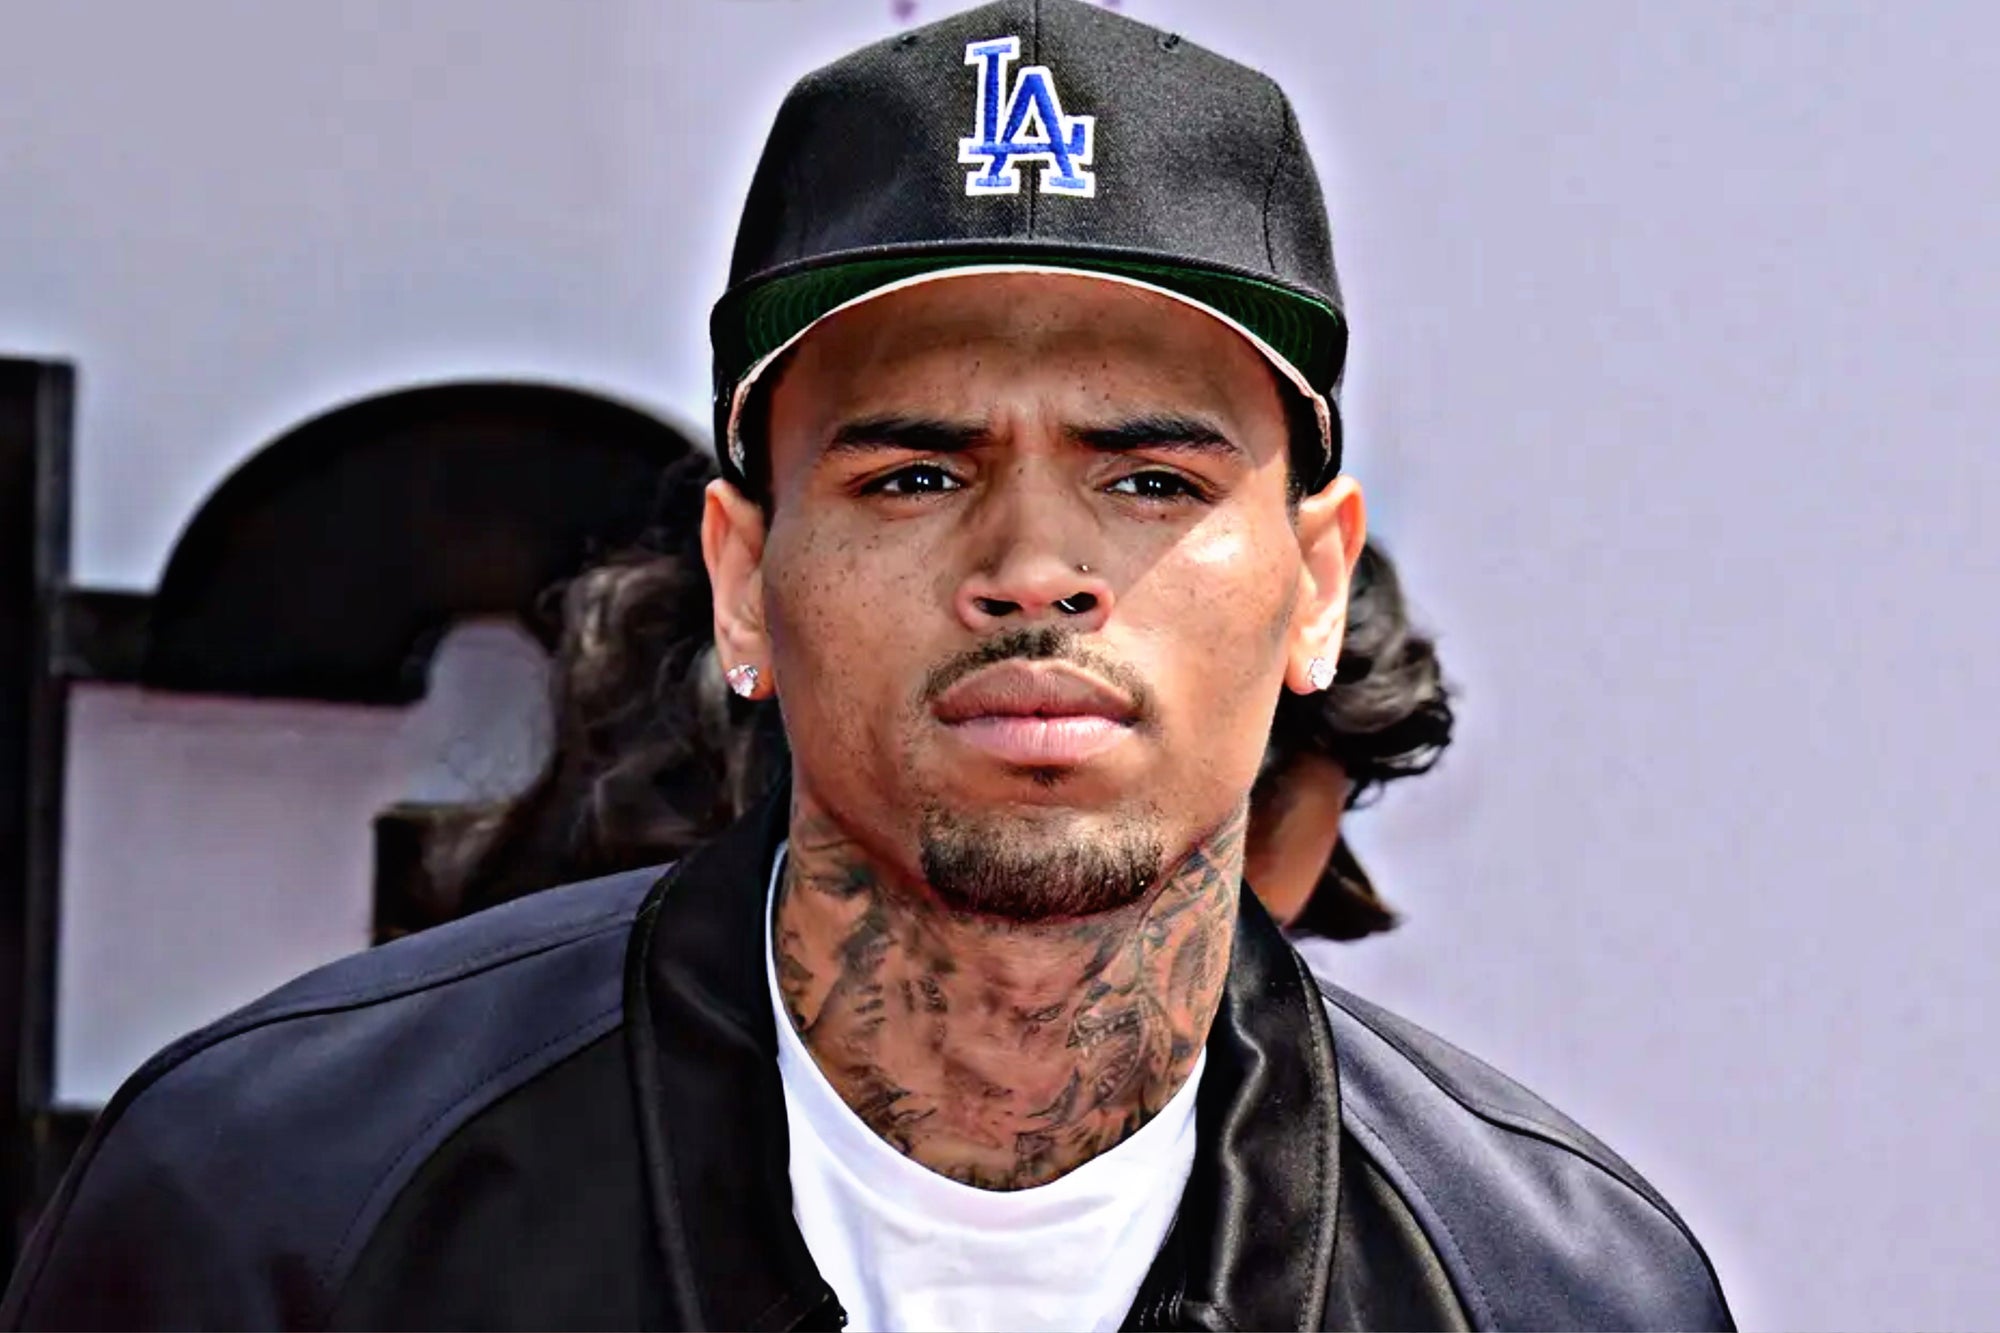 Chris Brown Faces Home Loss Threat Due to $1.76 Million Debt with Popeyes - Pres